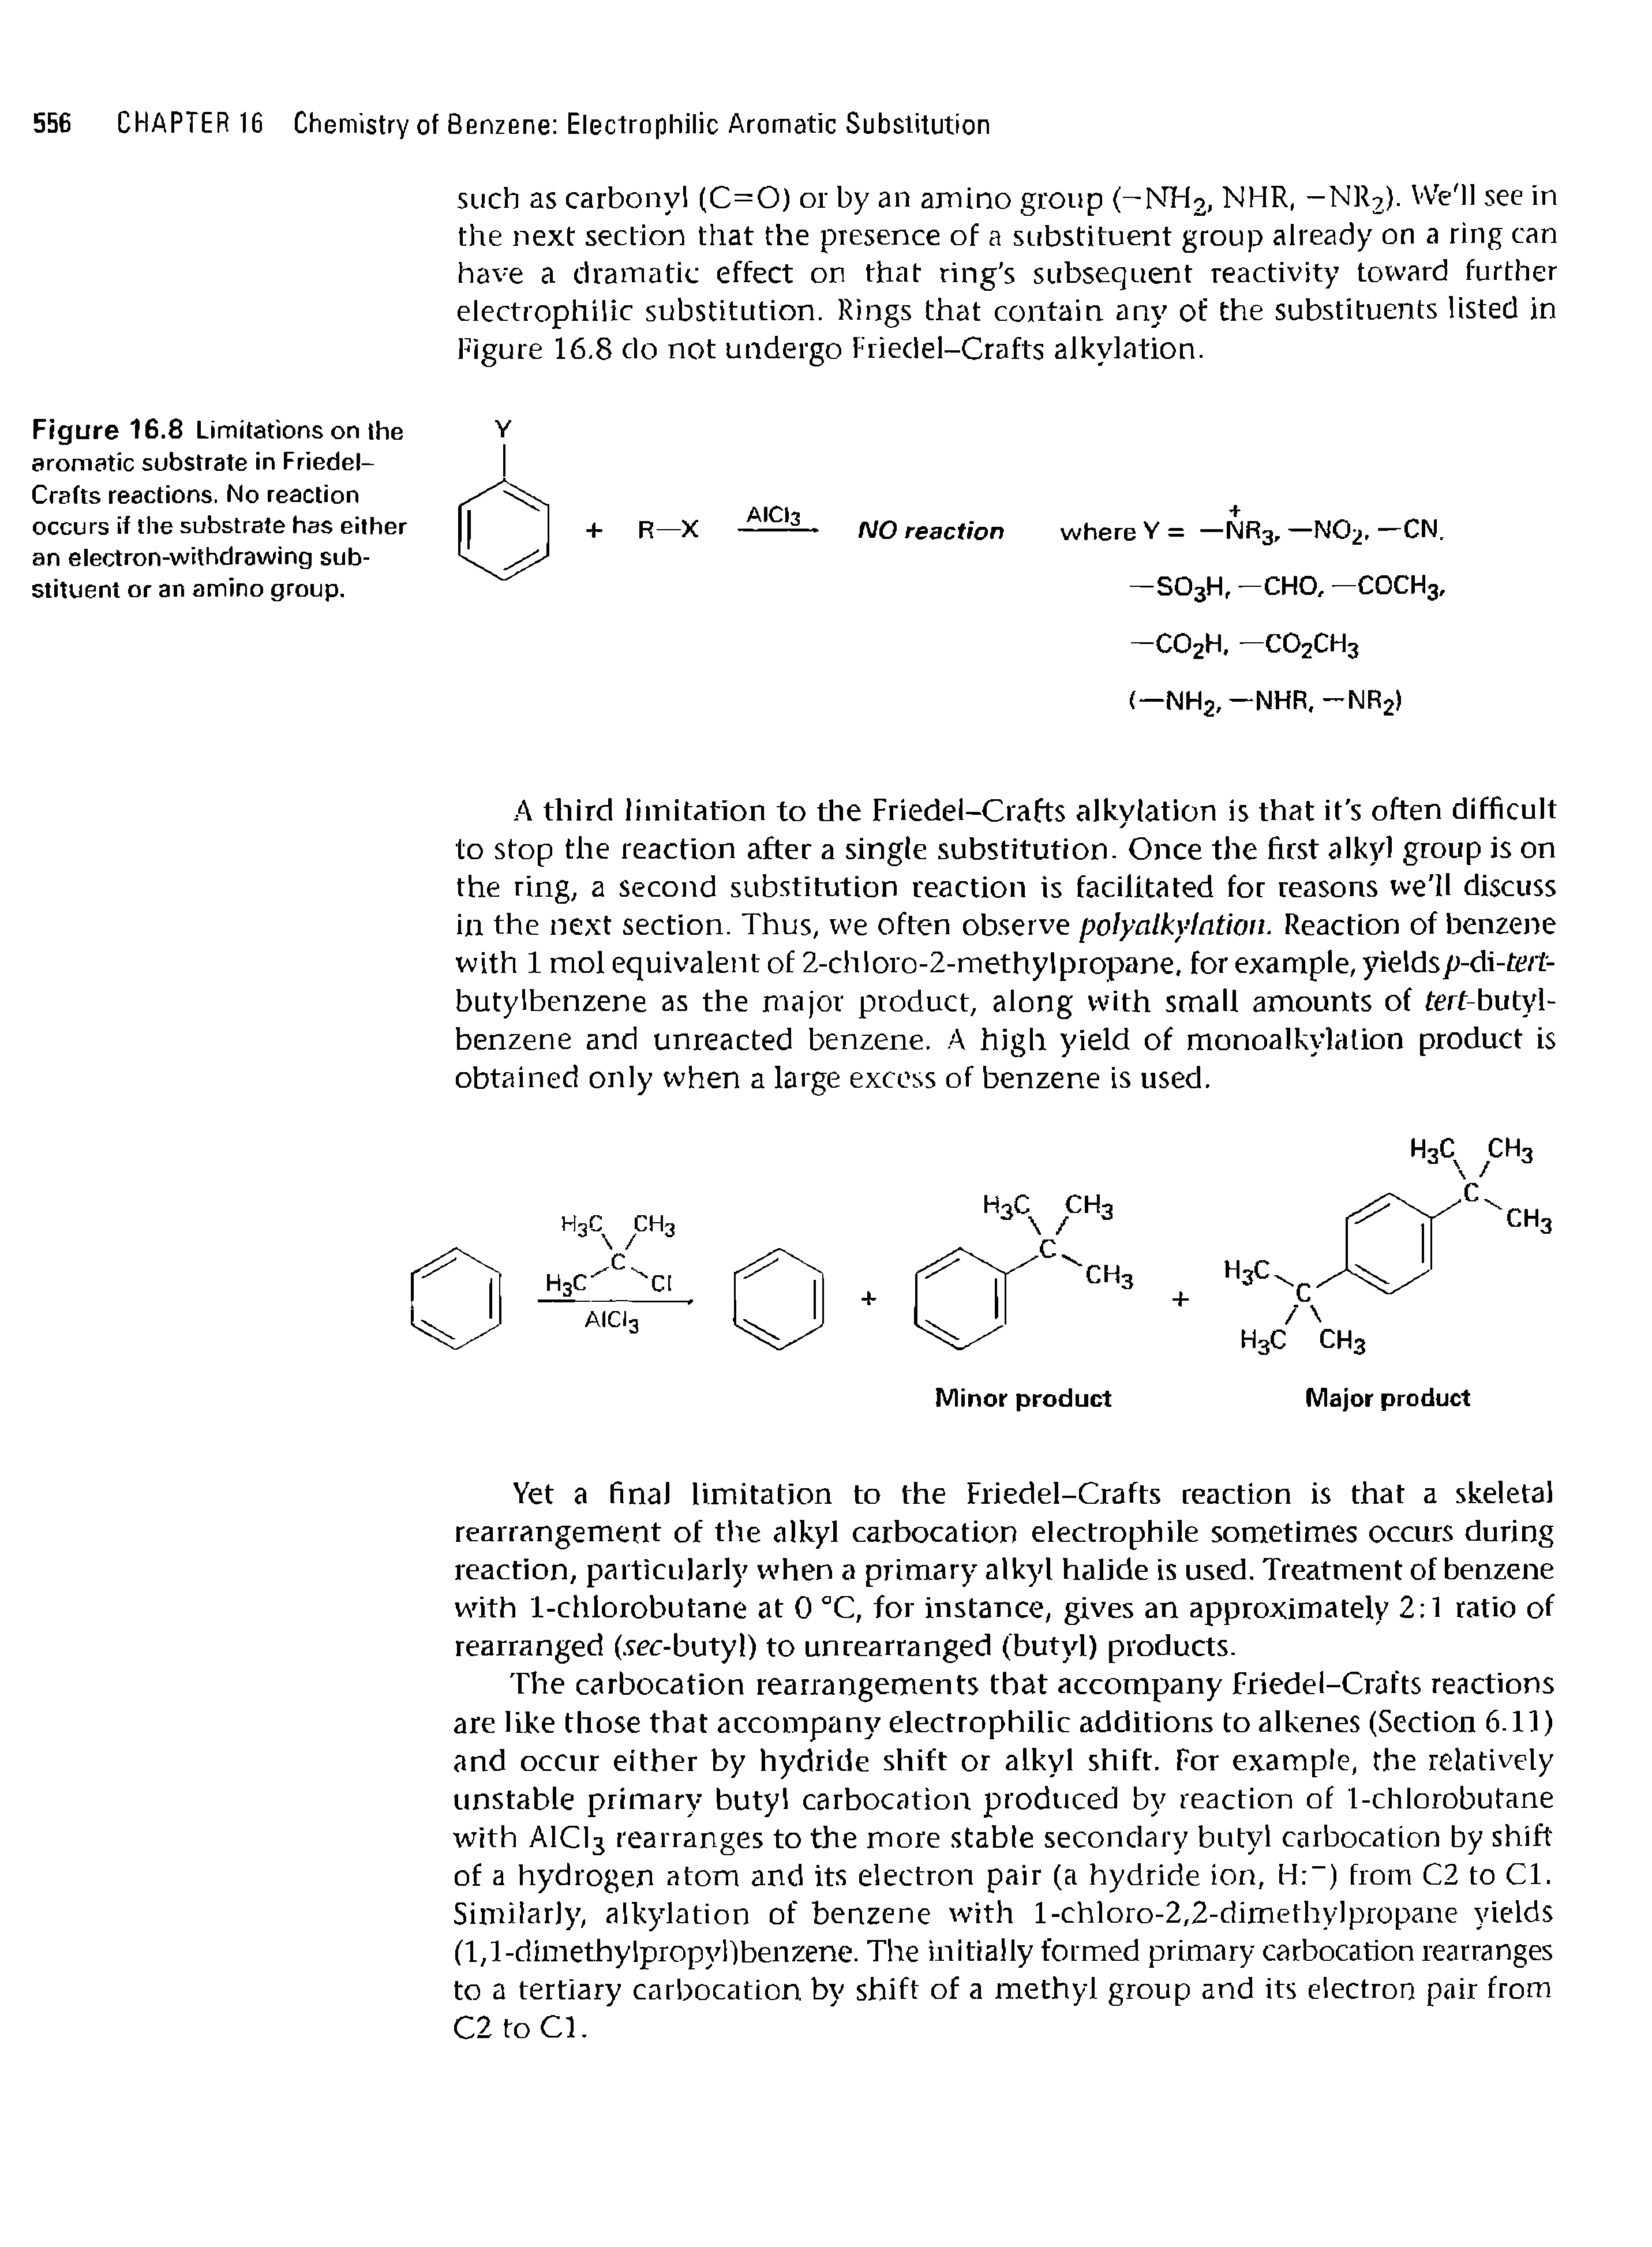 Figure 16.8 Limitations on the aromatic substrate in Friedel-Crafts reactions. No reaction occurs if the substrate has either an electron-withdrawing substituent or an amino group.